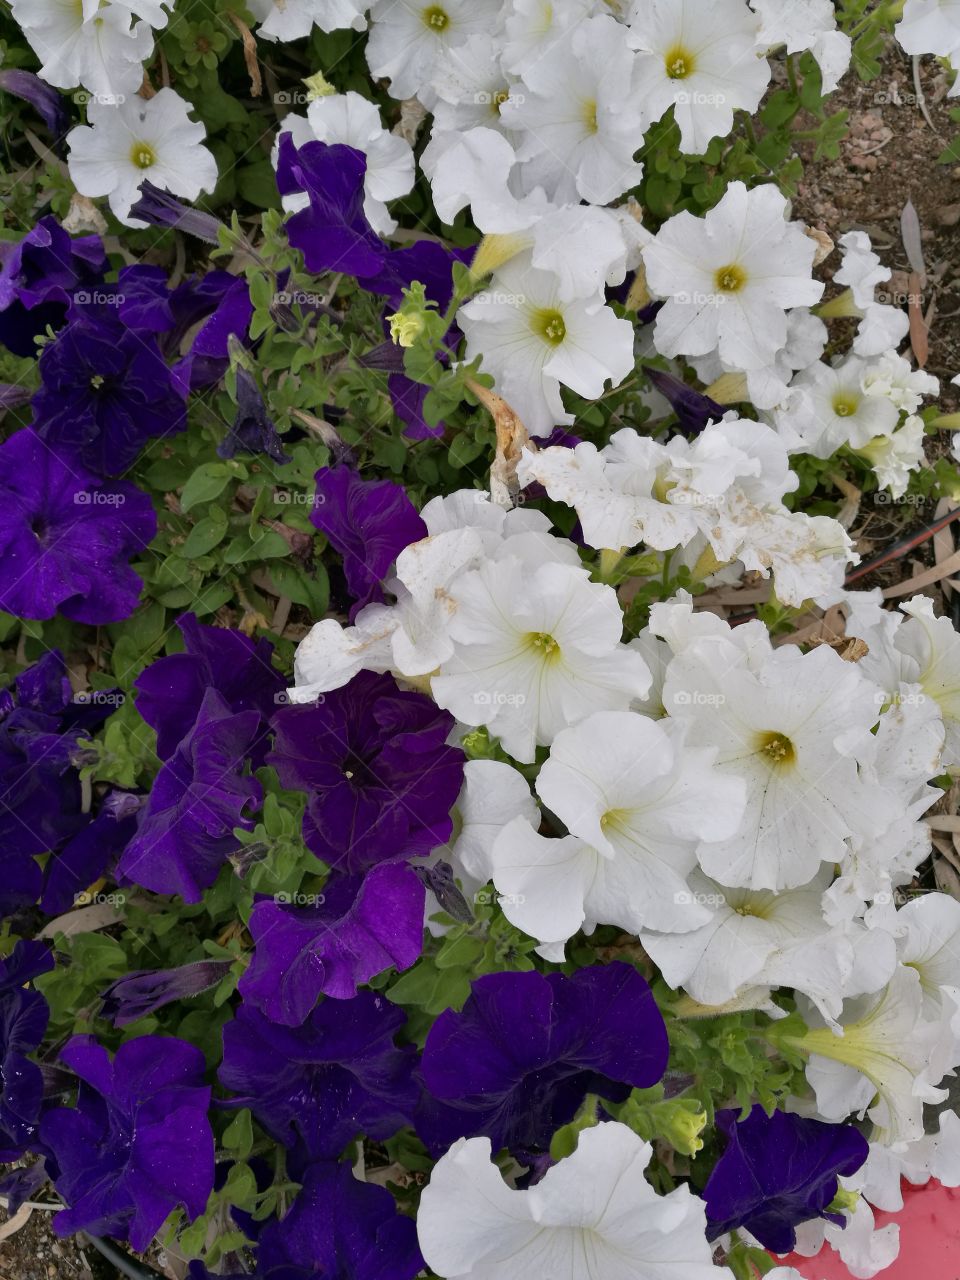 Background of white and purple petunia